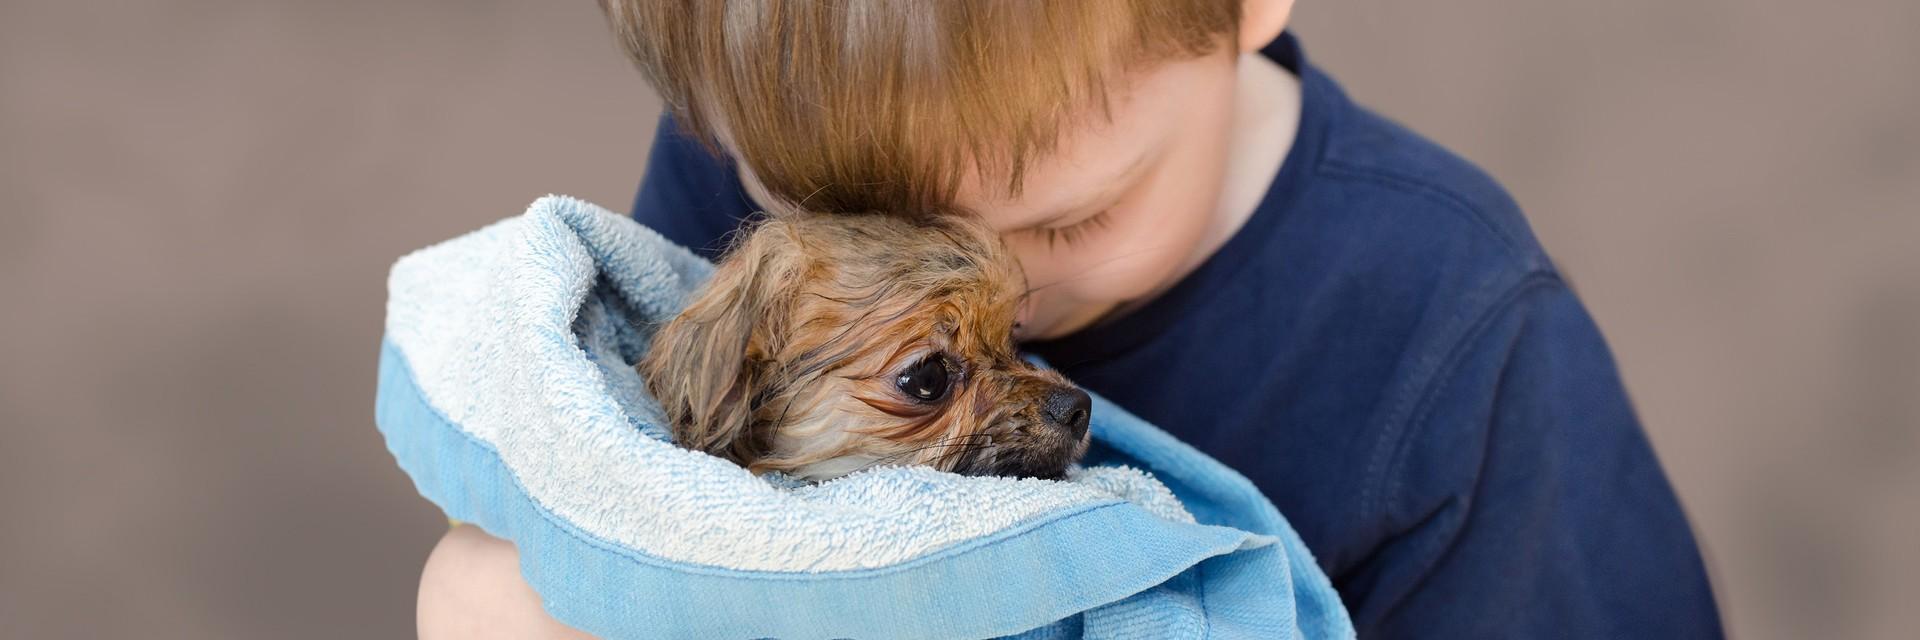 Little boy with a dog in a blanket